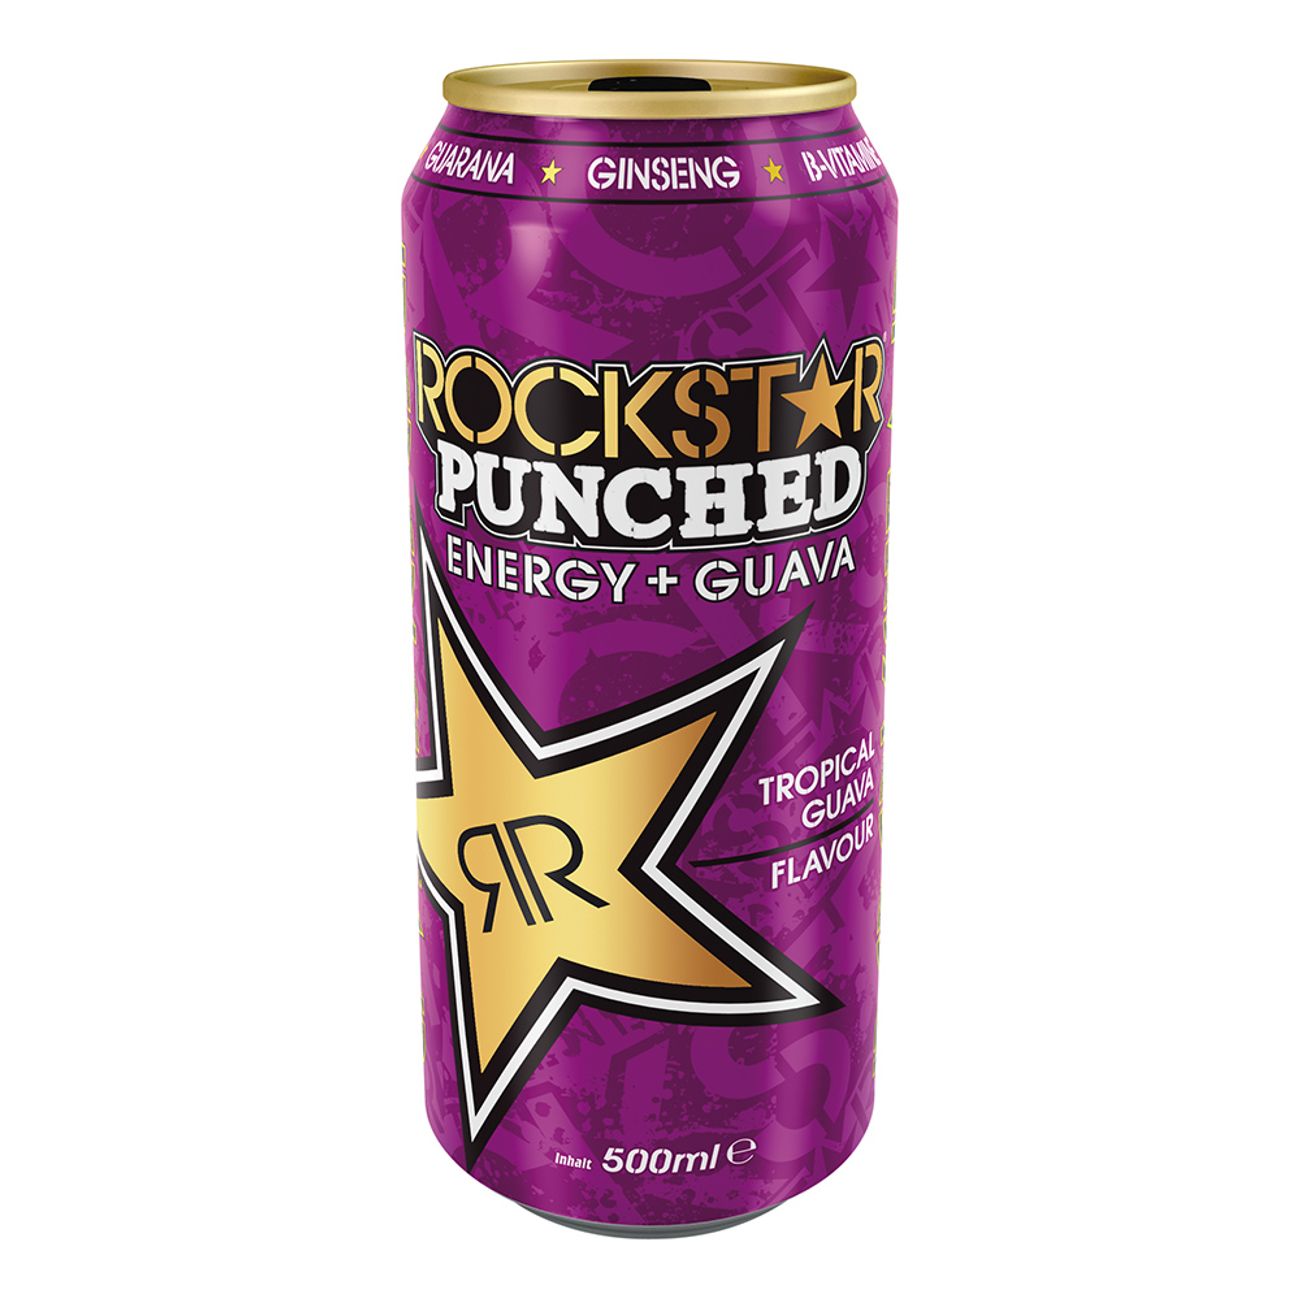 rockstar-punched-tropical-guava-2